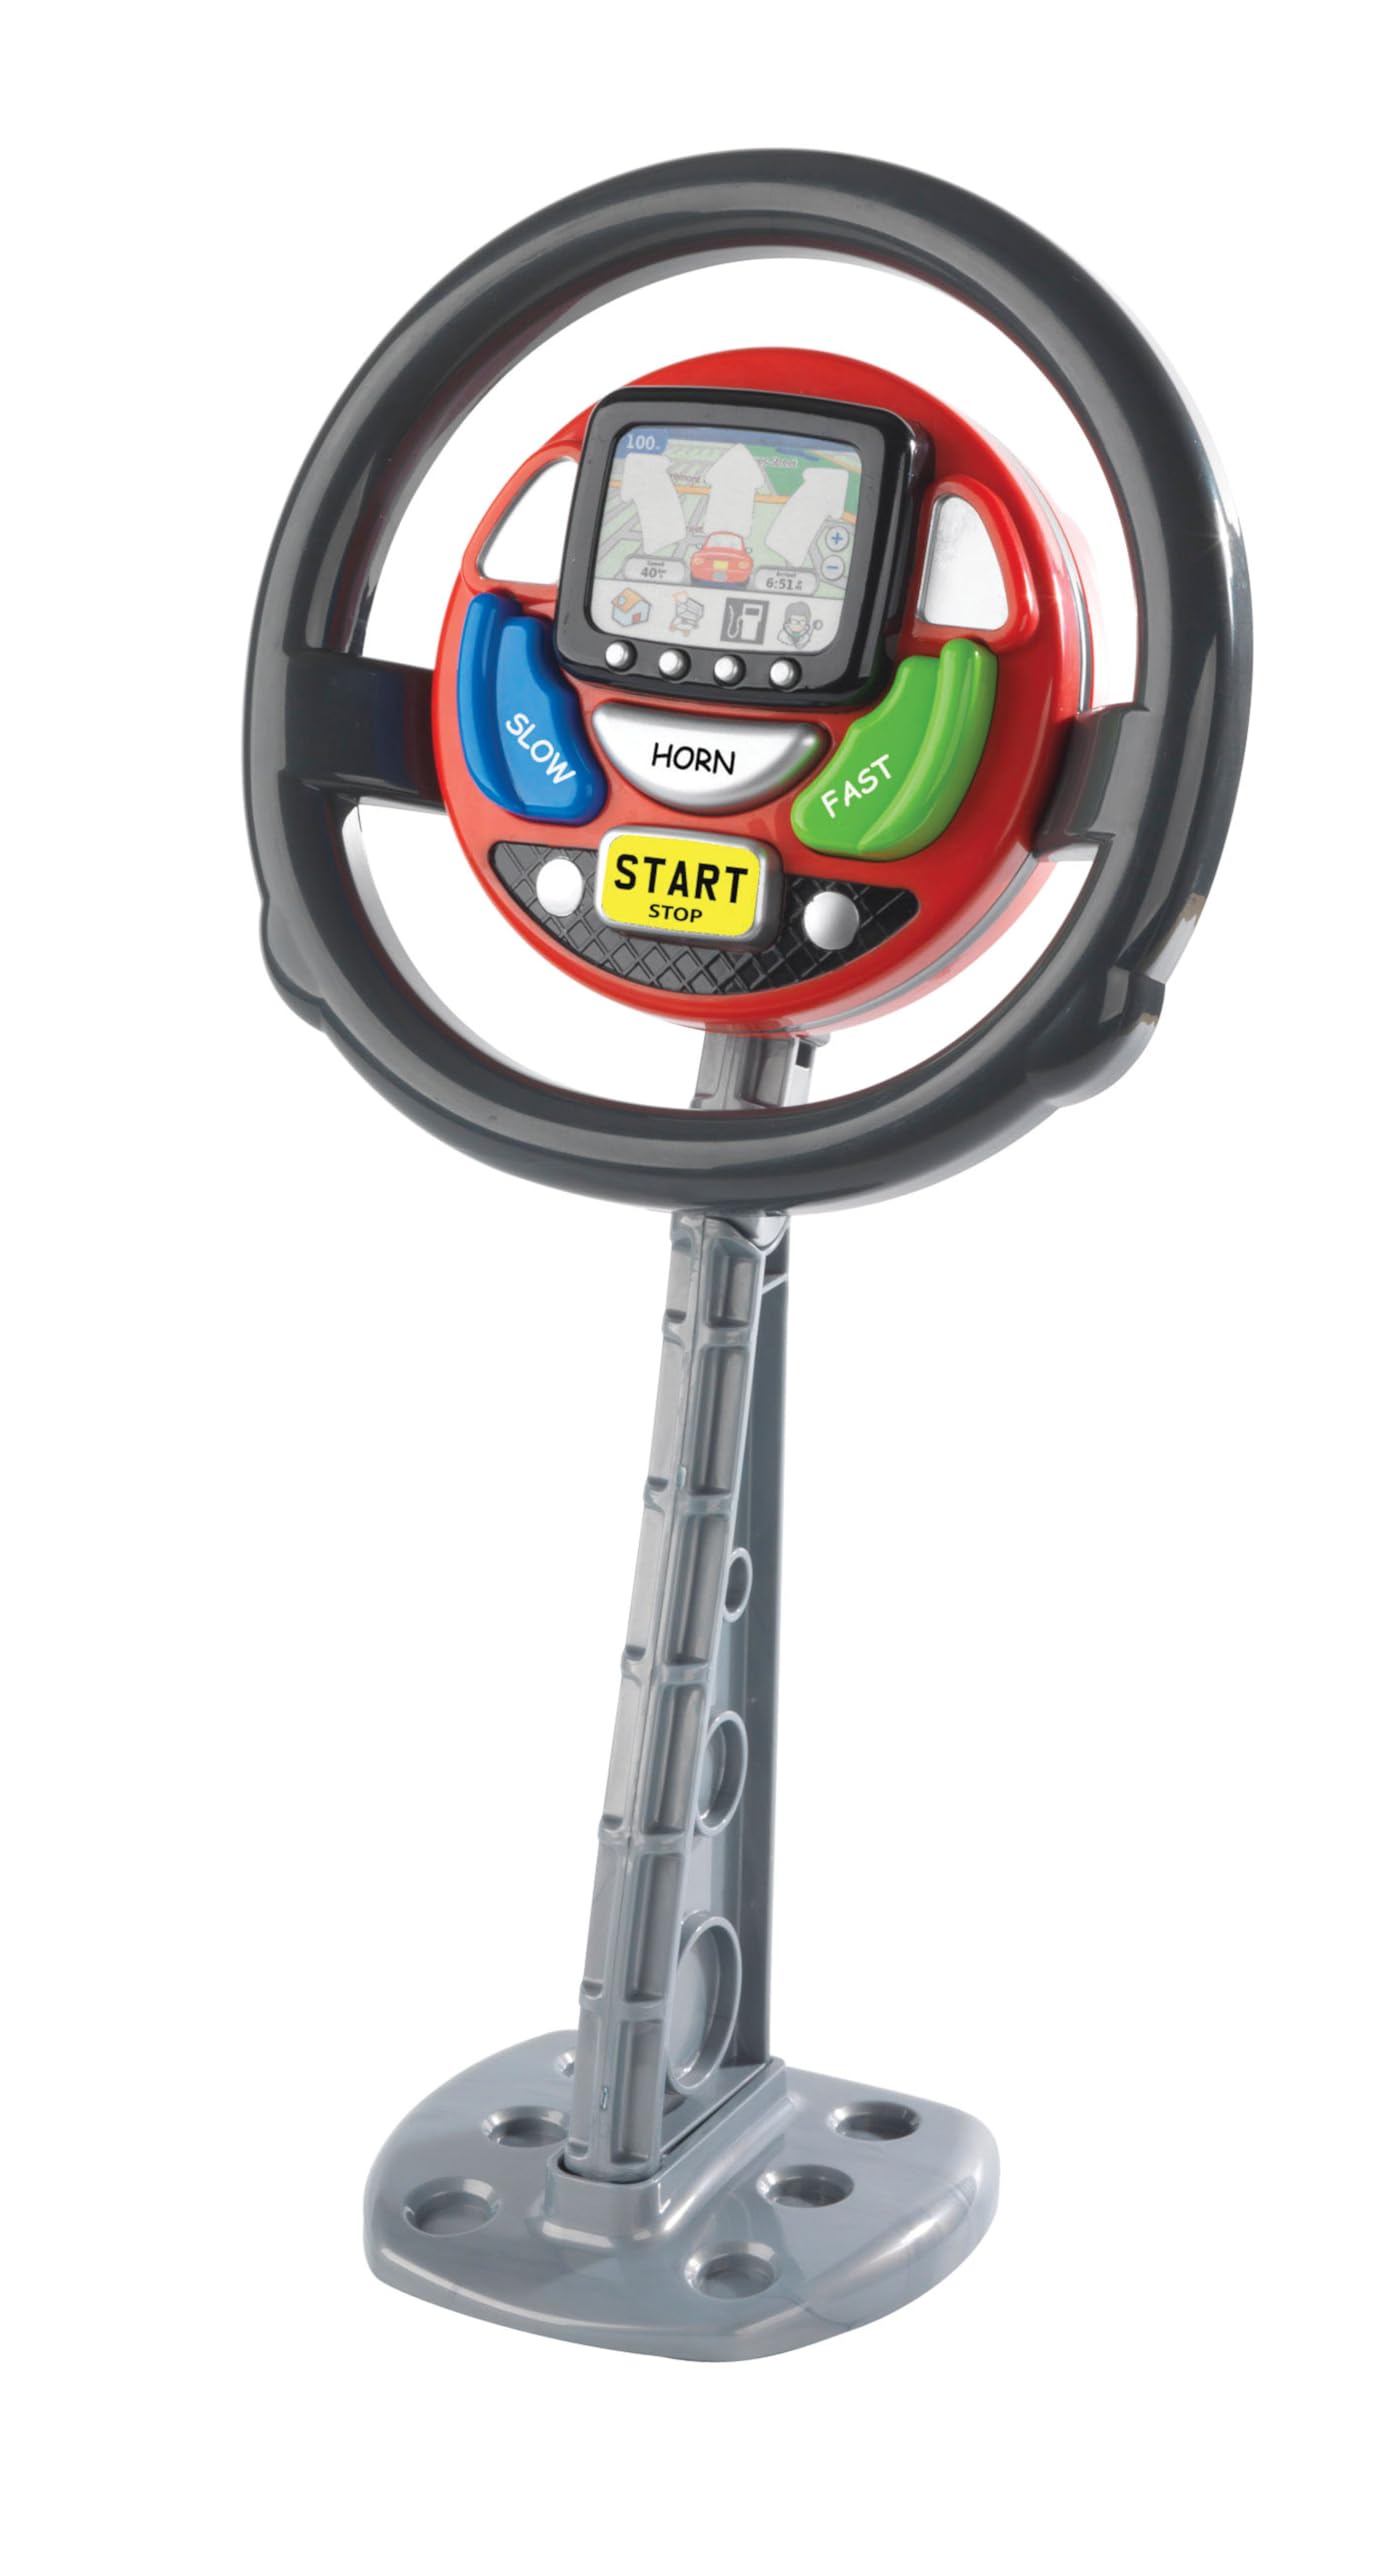 Casdon Sat Nav Steering Wheel , Toy Steering Wheel For Children Aged 3+ , Provides Endless Excitement With Spoken Commands And Motoring Sounds!